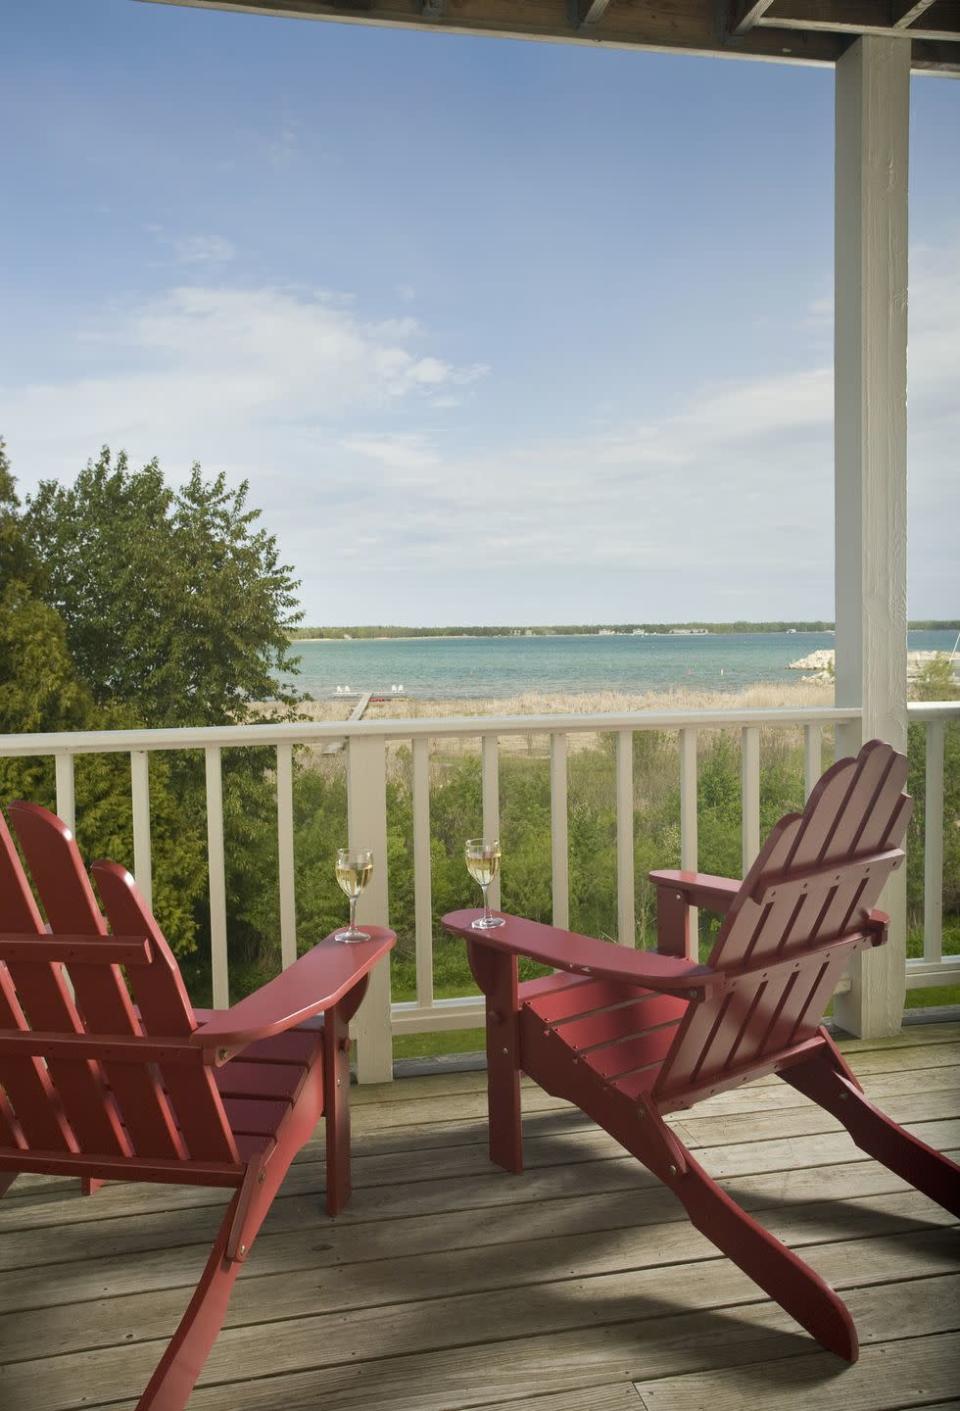 <p>Wisconsin’s Door County region is famous for its charm, and it’s equally famed for its close proximity to Lake Michigan. Stay right on the shore at this inn, admiring the vistas from your balcony while lingering over your freshly made breakfast.</p><p><a class="link " href="https://go.redirectingat.com?id=74968X1596630&url=https%3A%2F%2Fwww.tripadvisor.com%2FHotel_Review-g59681-d83320-Reviews-Blacksmith_Inn_On_the_Shore-Baileys_Harbor_Wisconsin.html&sref=https%3A%2F%2Fwww.thepioneerwoman.com%2Fhome-lifestyle%2Fg38726769%2Fromantic-bed-and-breakfasts-in-the-us%2F" rel="nofollow noopener" target="_blank" data-ylk="slk:PLAN YOUR TRIP">PLAN YOUR TRIP</a> </p>